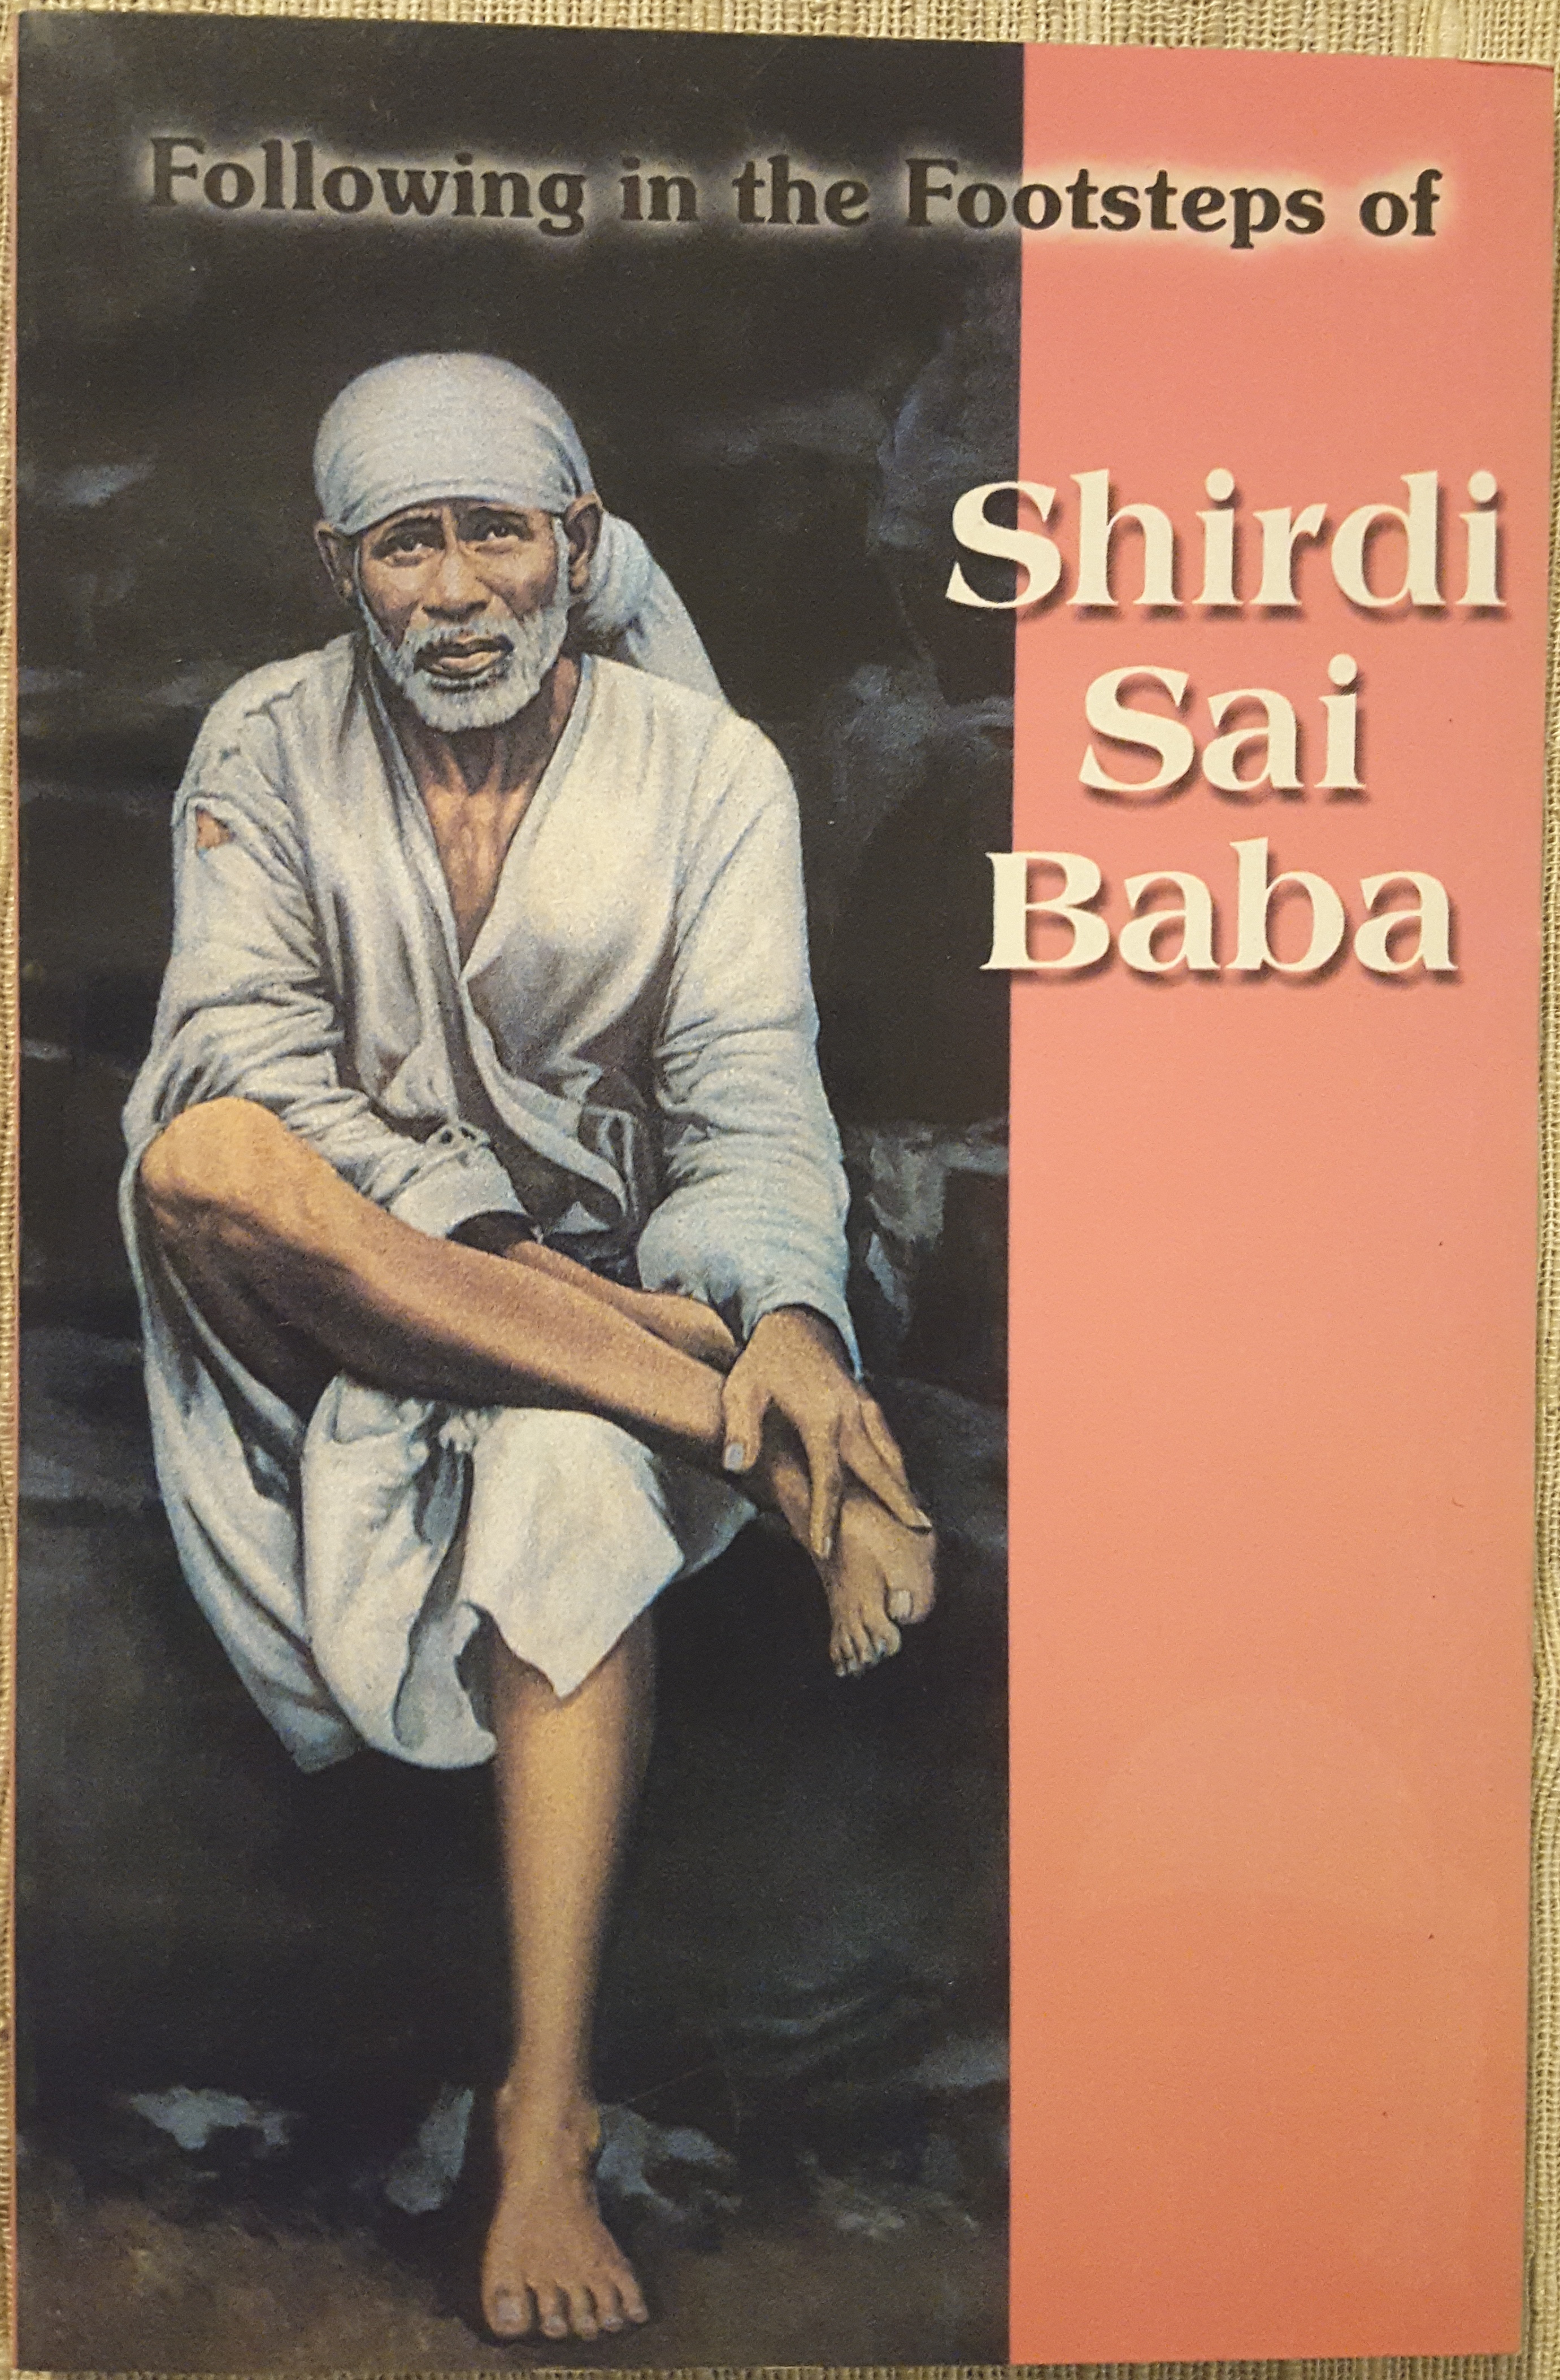 Shirdi Sai Baba Temple Frankfurt Germany (Deutschland) recommended book - Following in the Footsteps of Shirdi Sai Baba .